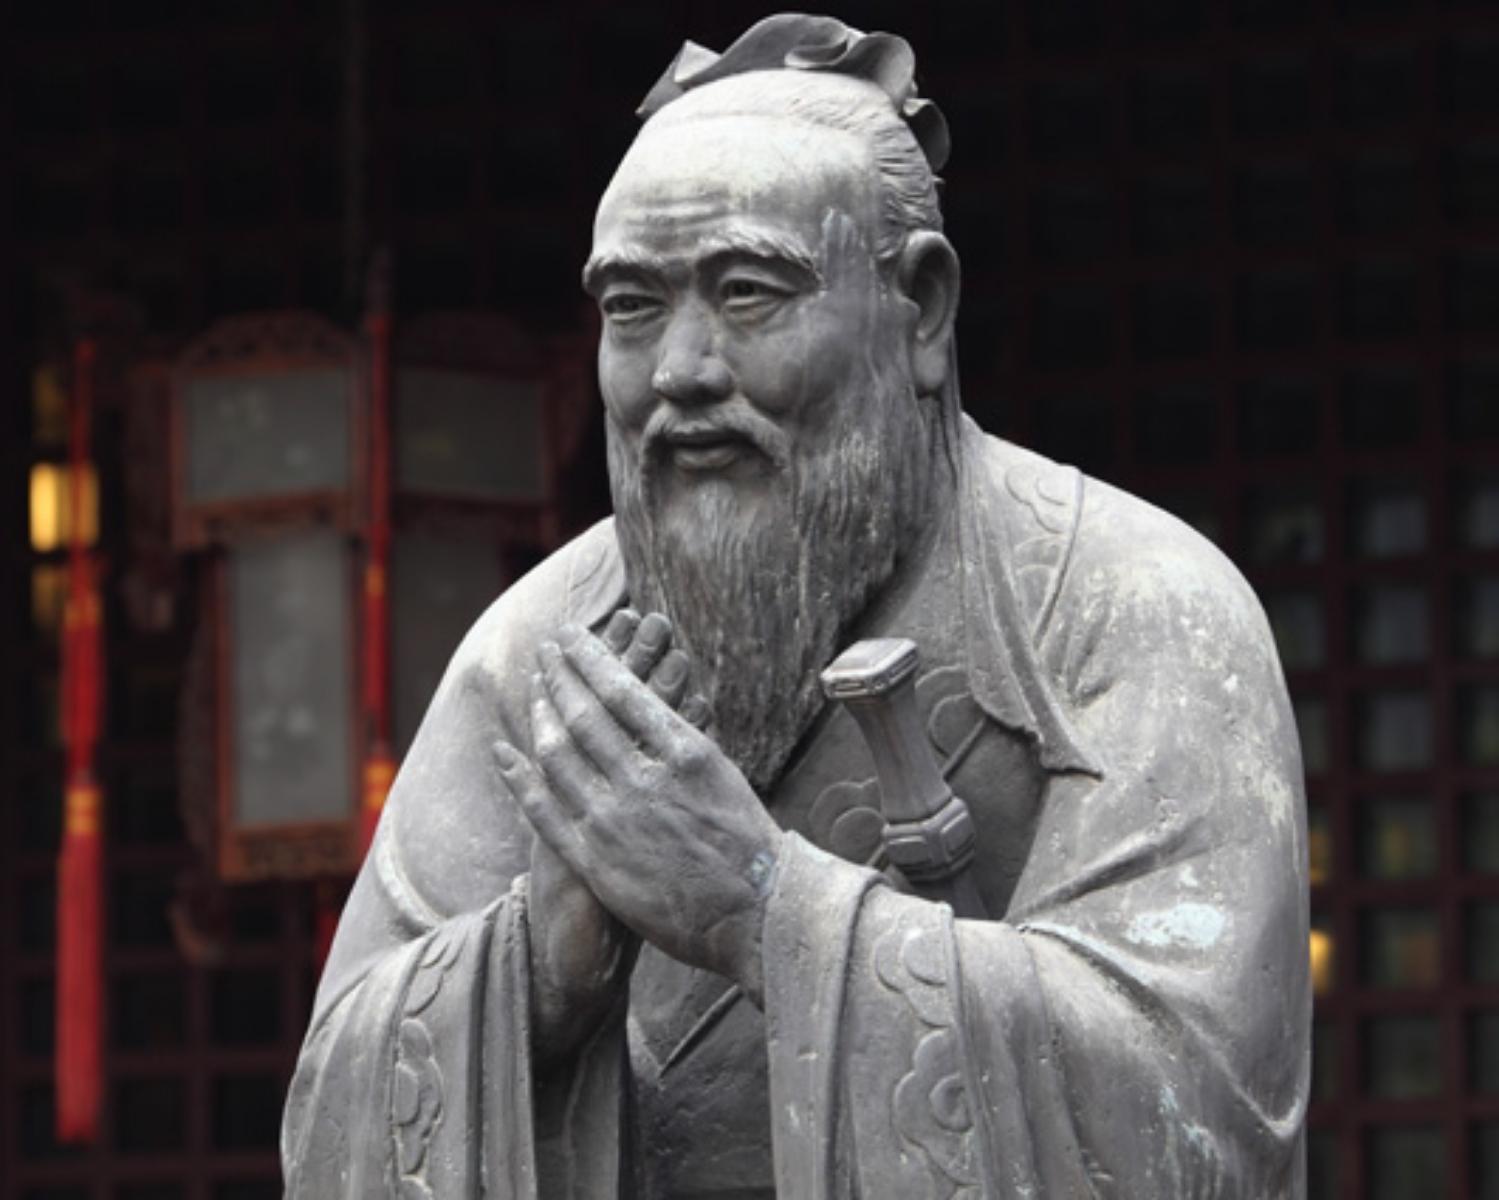 CONFUCIUS A.K.A 'THE GREAT SAGE'